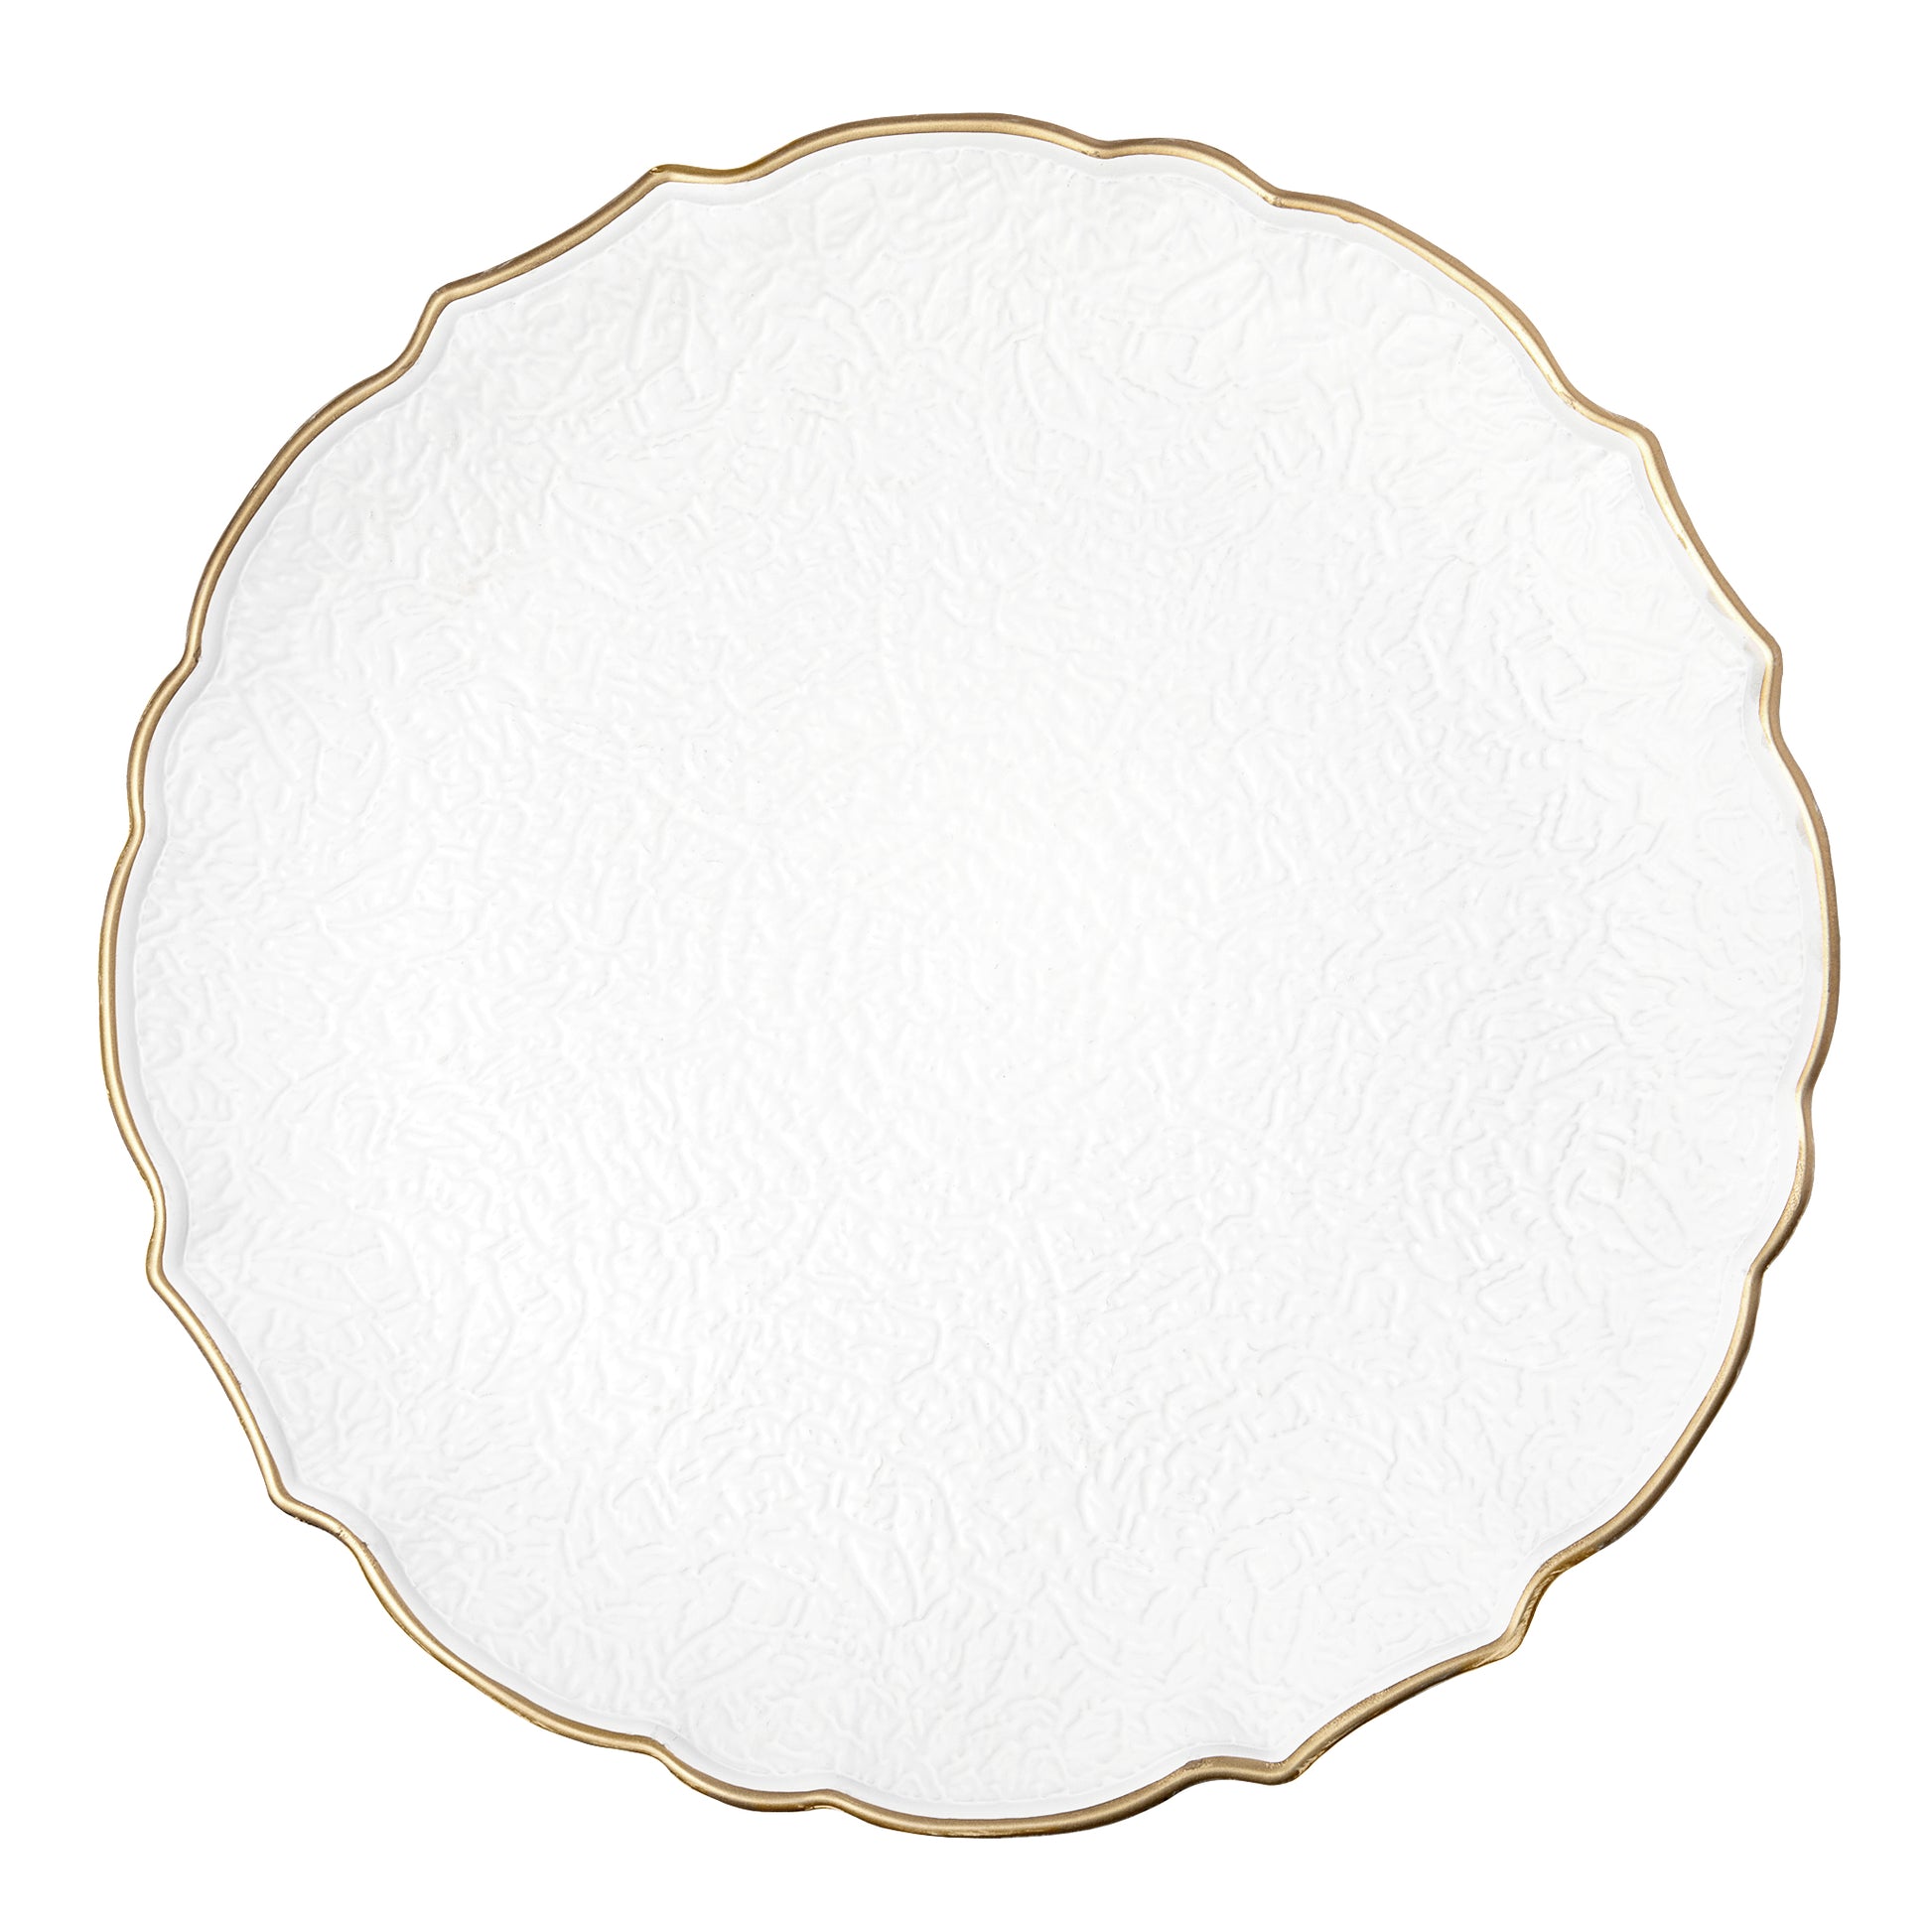 Victorian Embossed Acrylic Charger Plate - White Gold-Trimmed - CV Linens